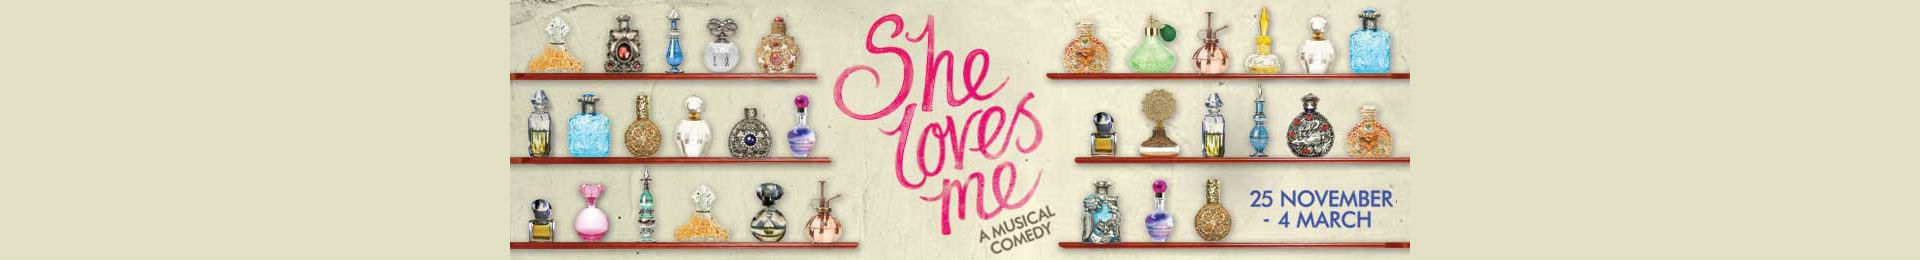 She Loves Me tickets